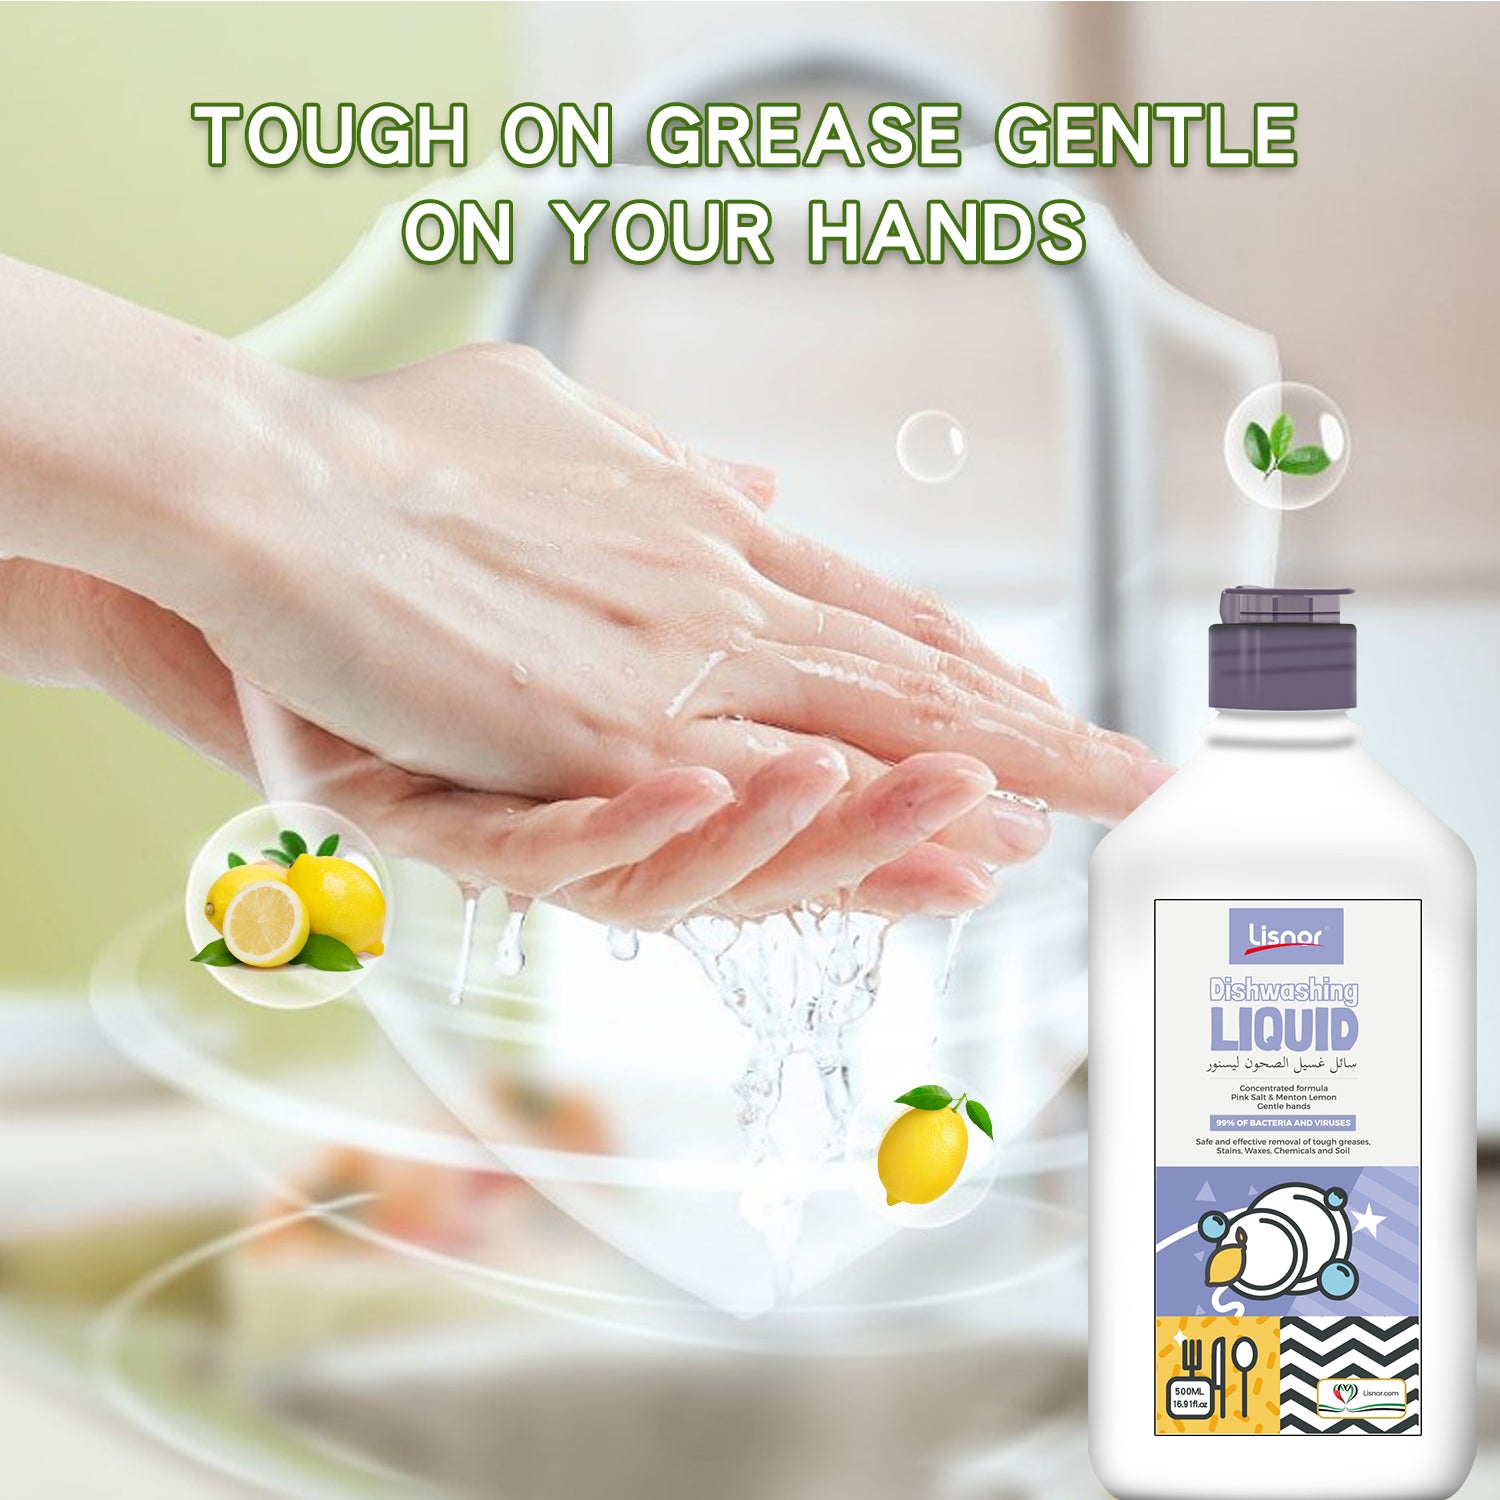 Dishwashing Liquid 500ml. Concentrated Formula Pink Salt & Menton Lemon. Gentle Hands. Safe and Effective removal of tough greases, Stains, Waxes, Chemicals and Soils. Pak of 2